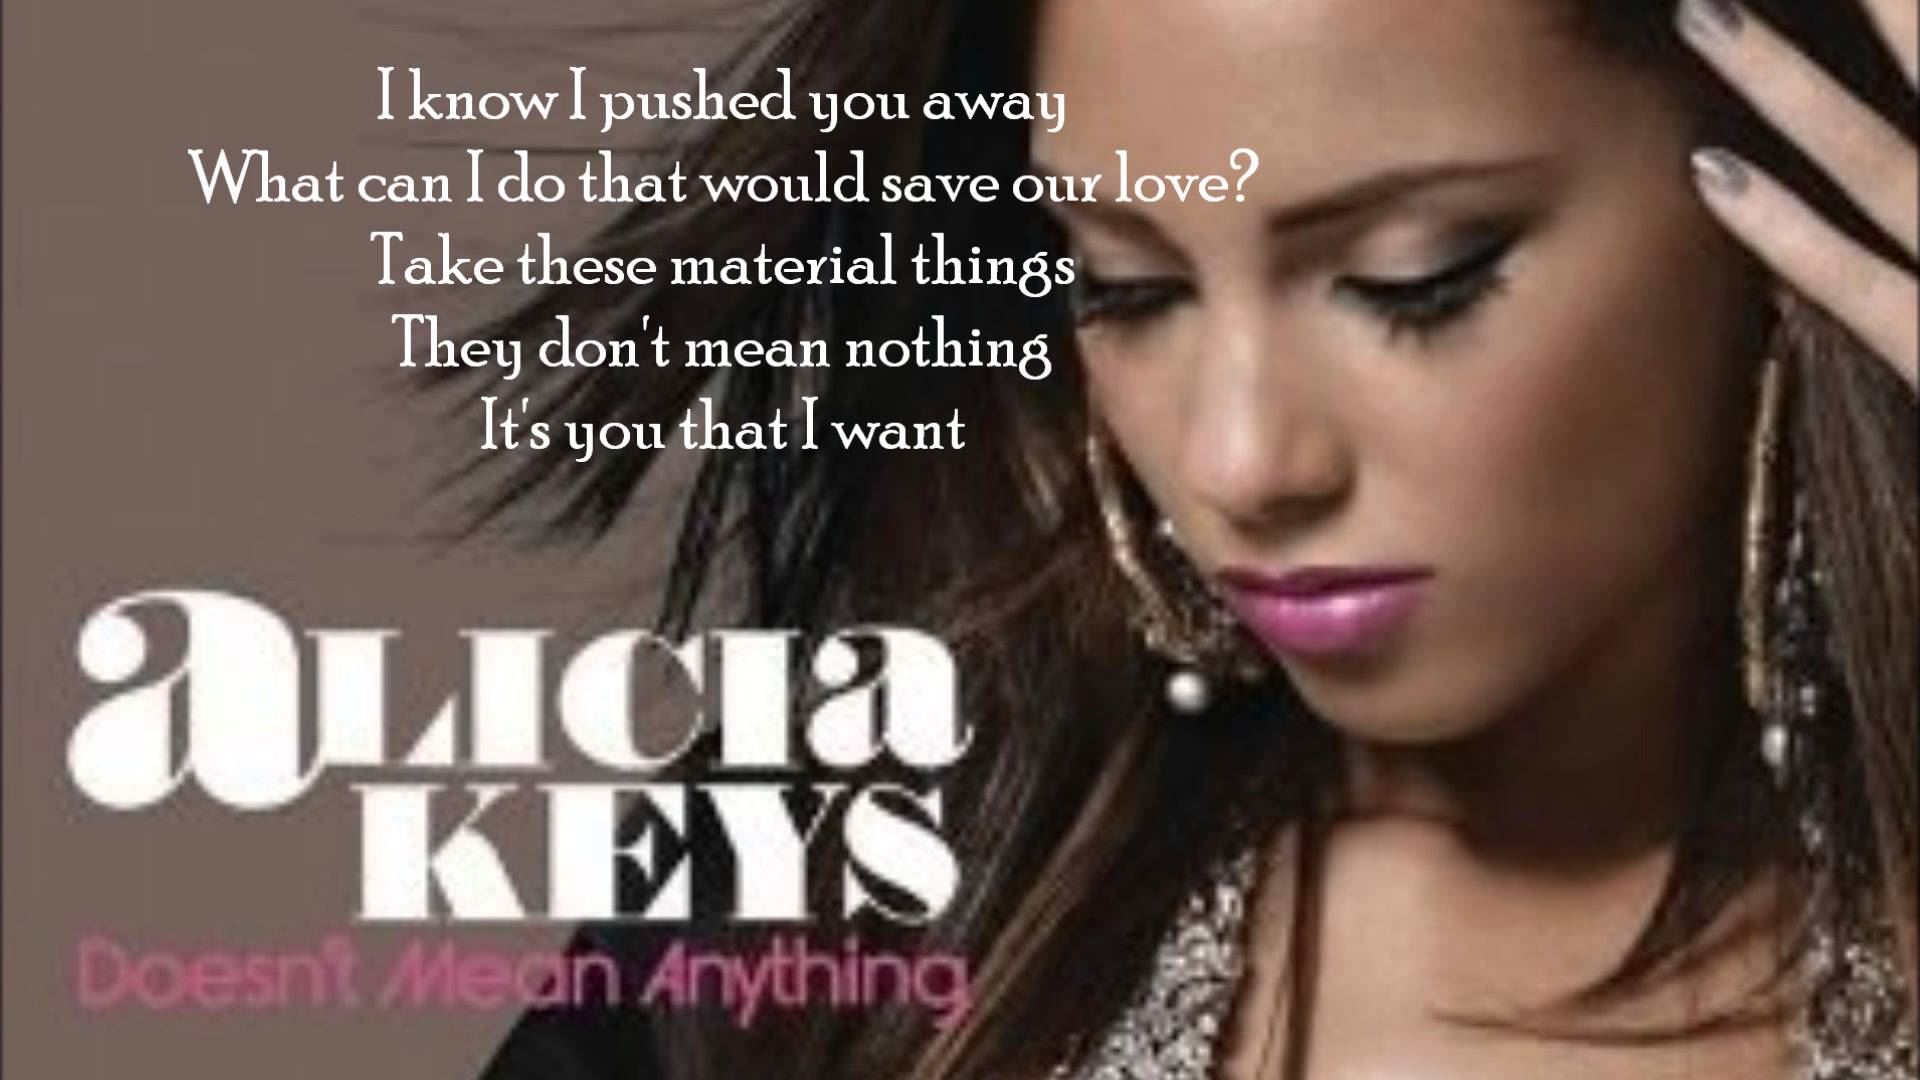 AliciaKeys-doesn't-mean-anything